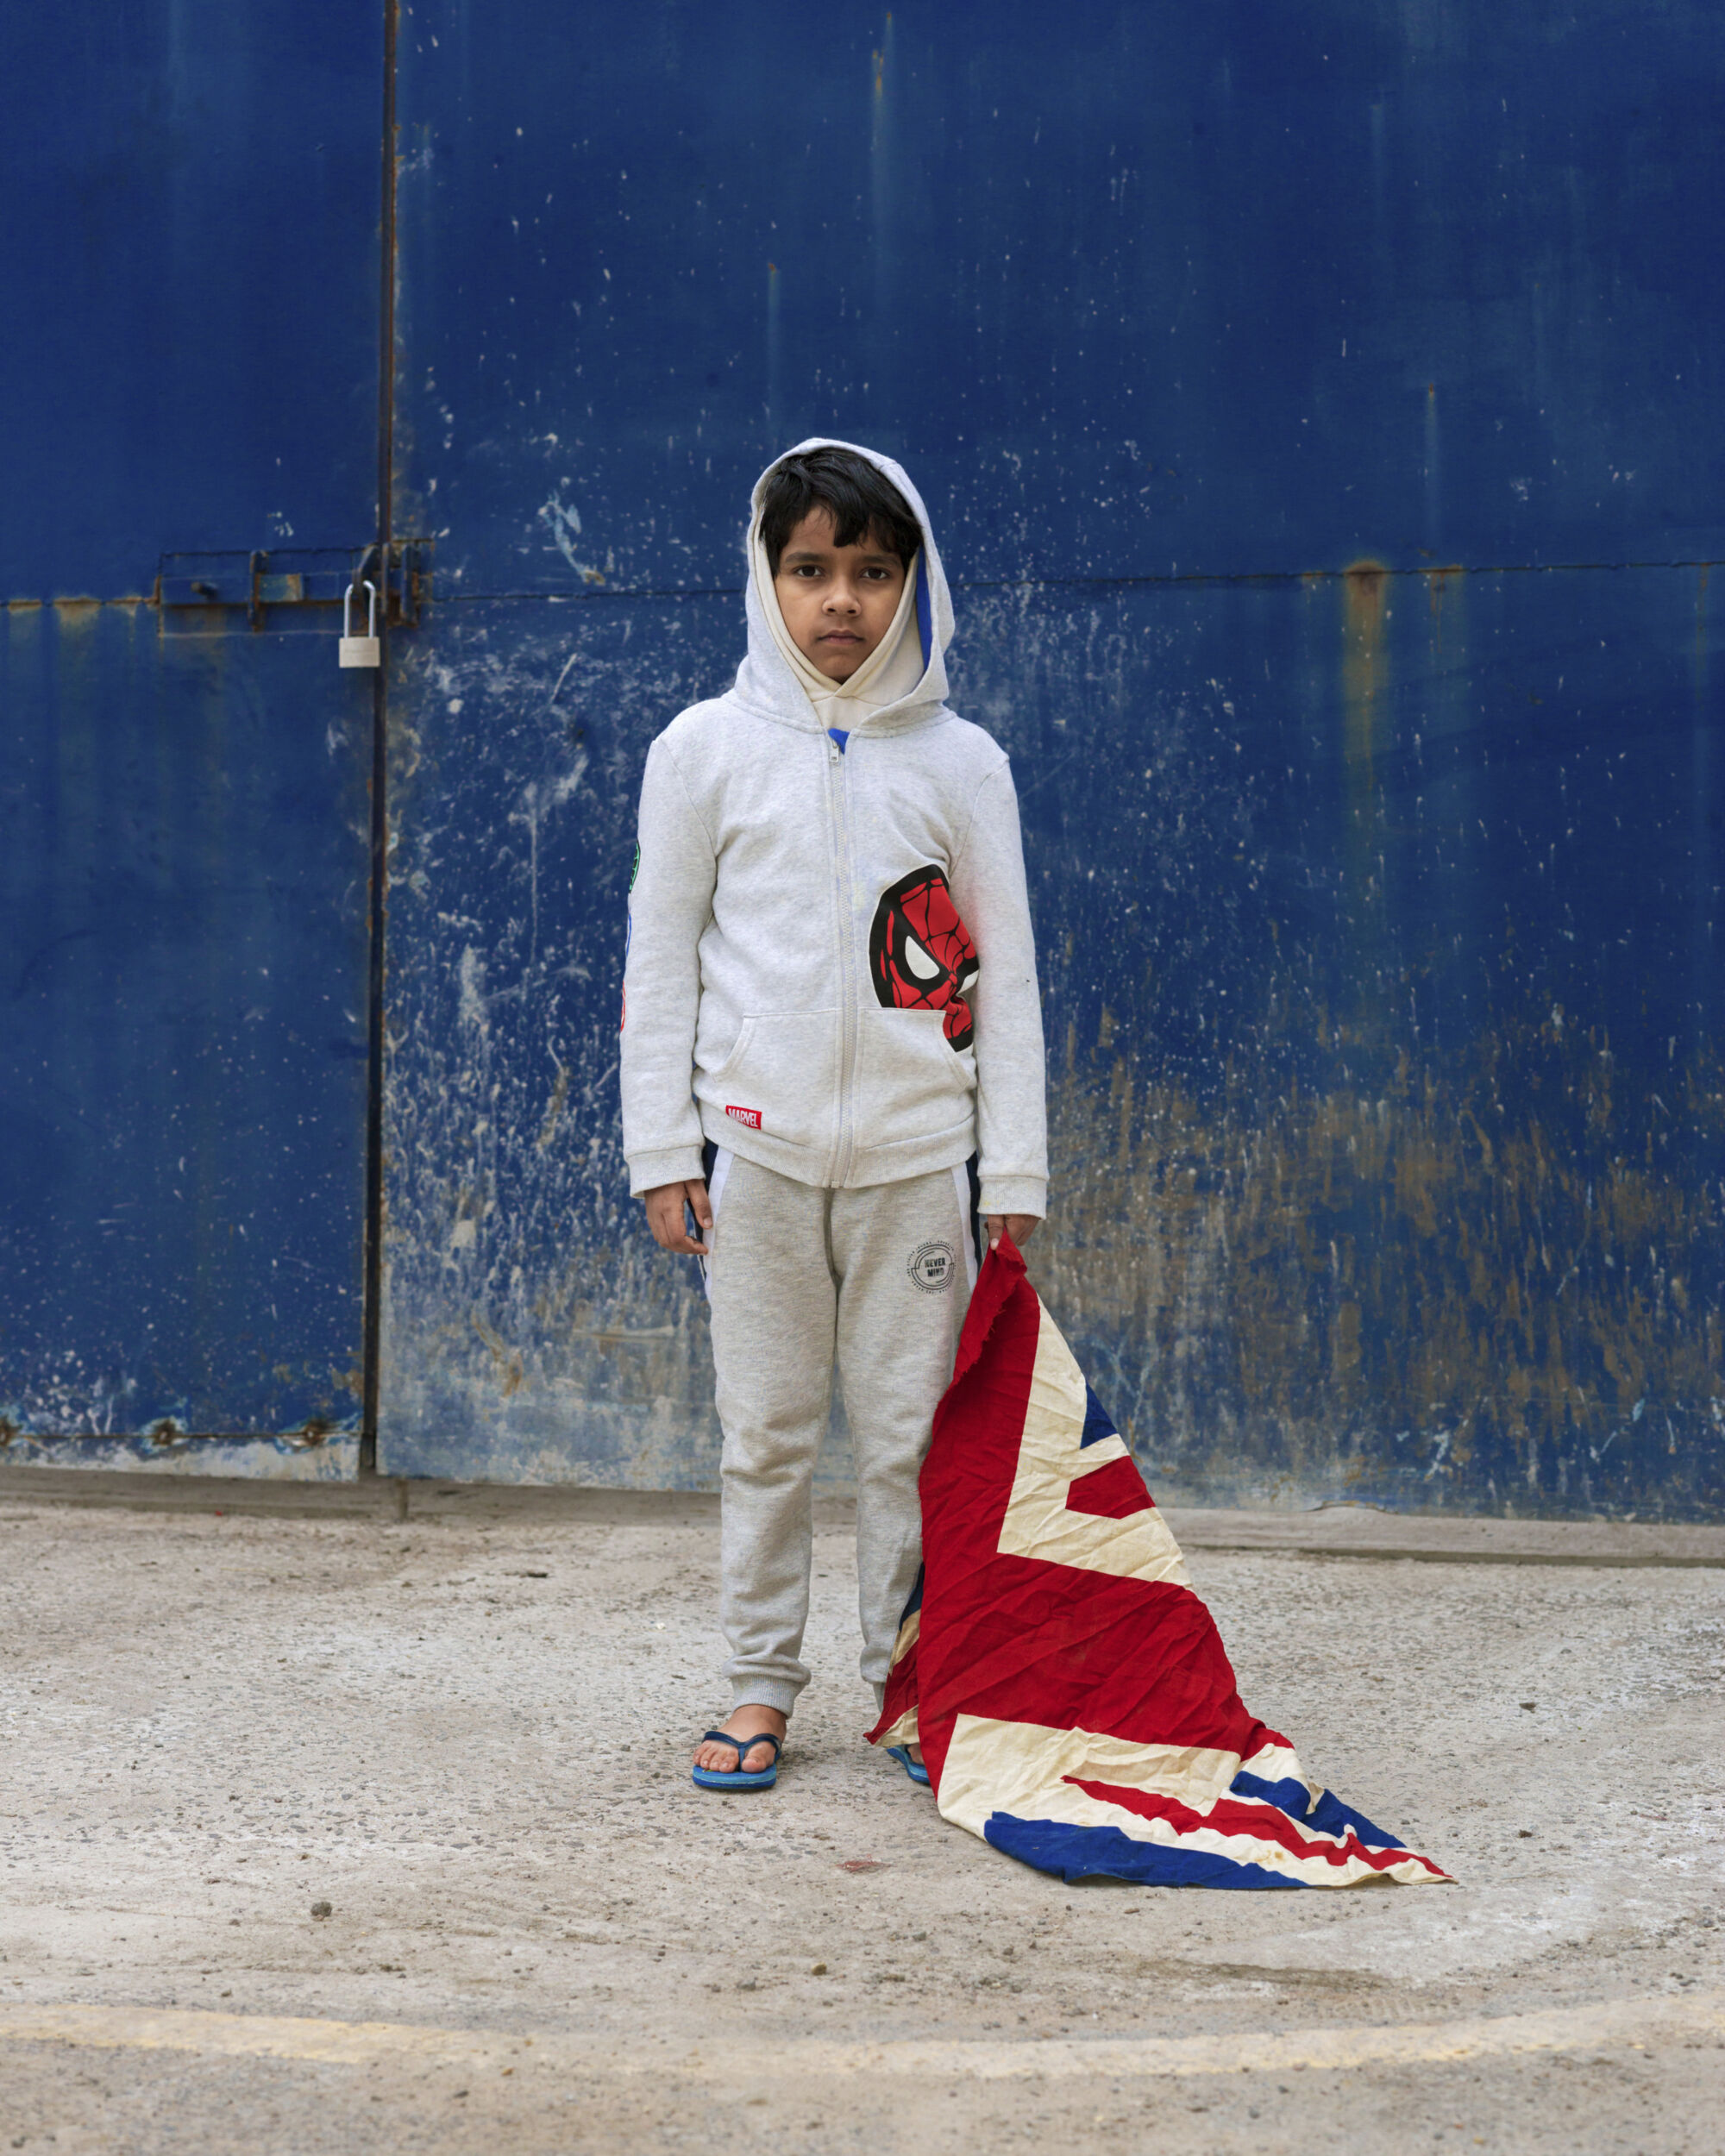 The Wick - Boy with the Union Flag, March 2021. From the series This Golden Mile by Kavi Pujara © Kavi Pujara
